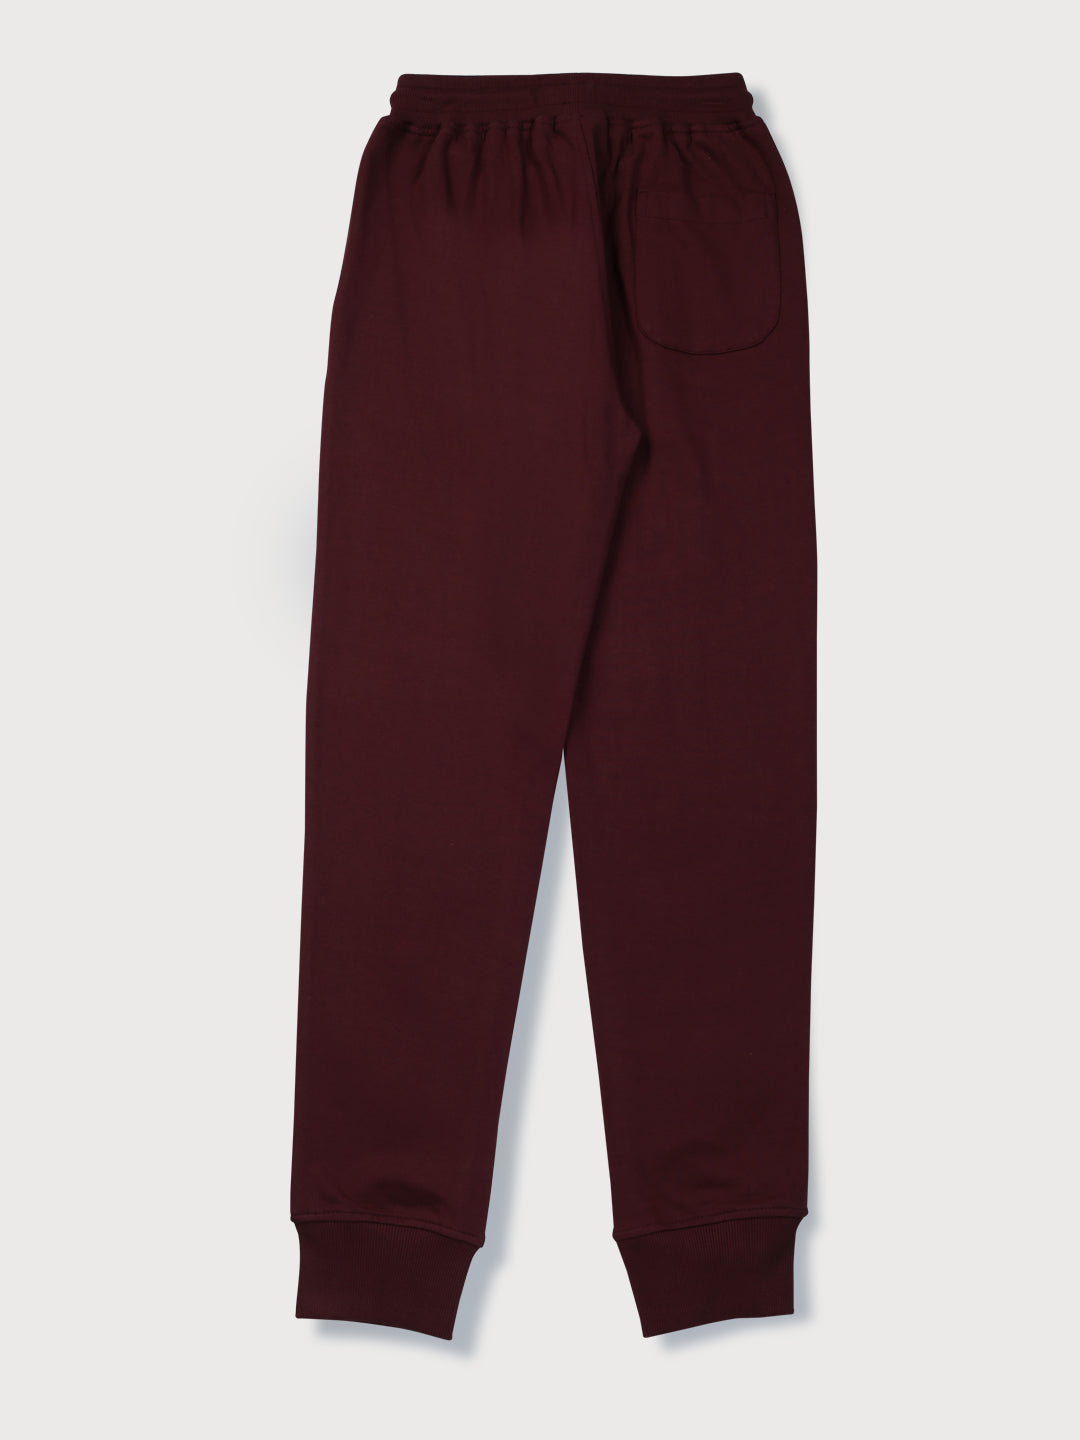 Boys Maroon Cotton Solid Elasticated Track Pant